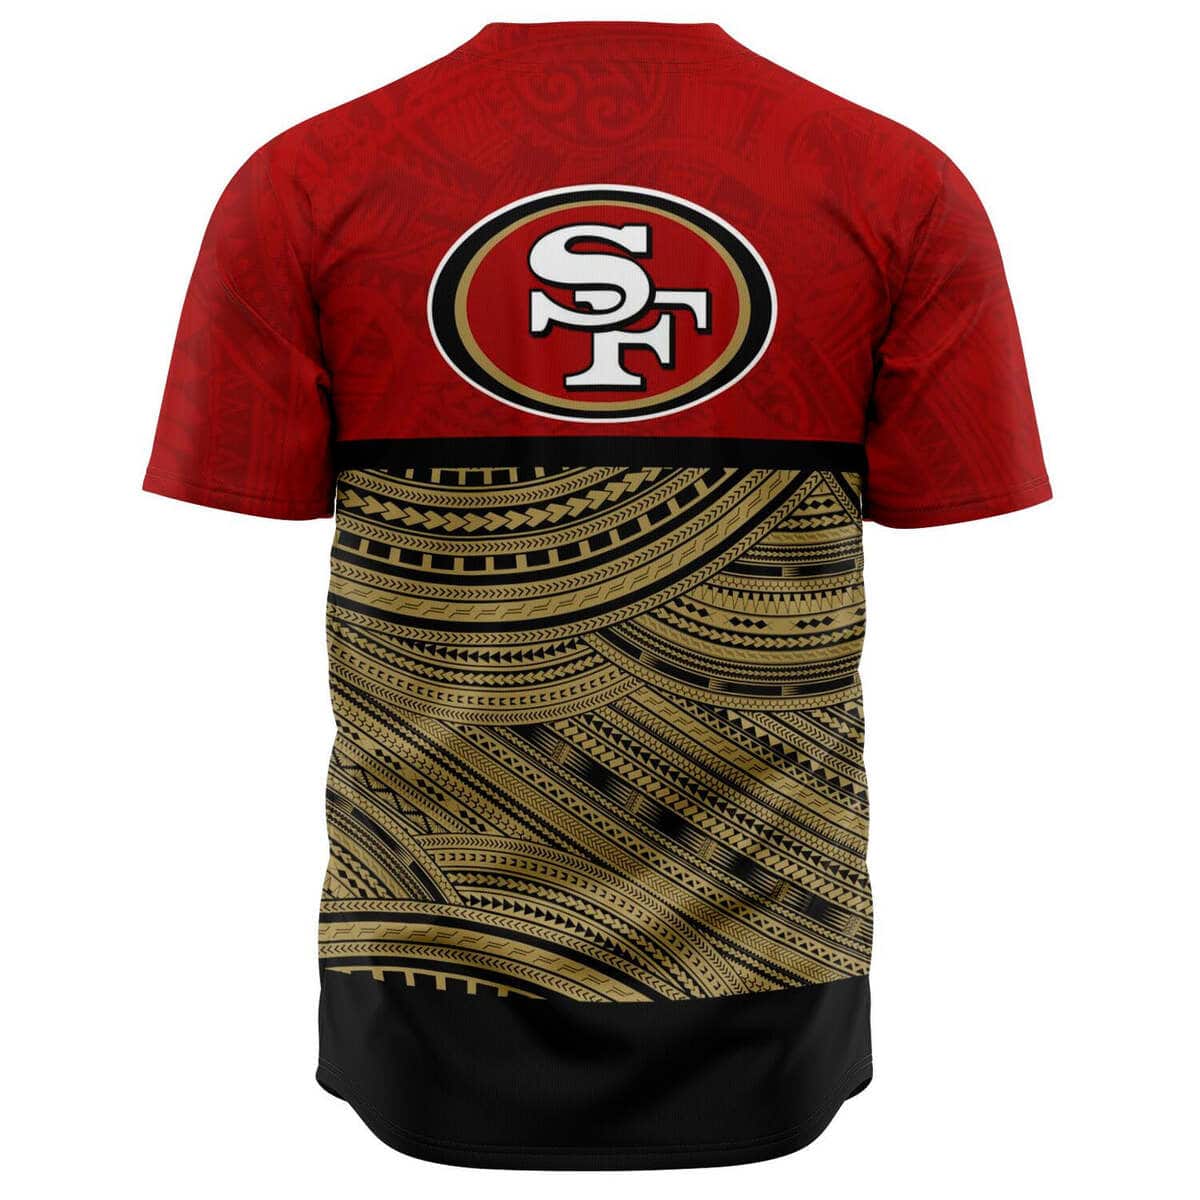 NFL San Francisco 49ers Baseball Jersey Polynesian Gift For Sporty Fans